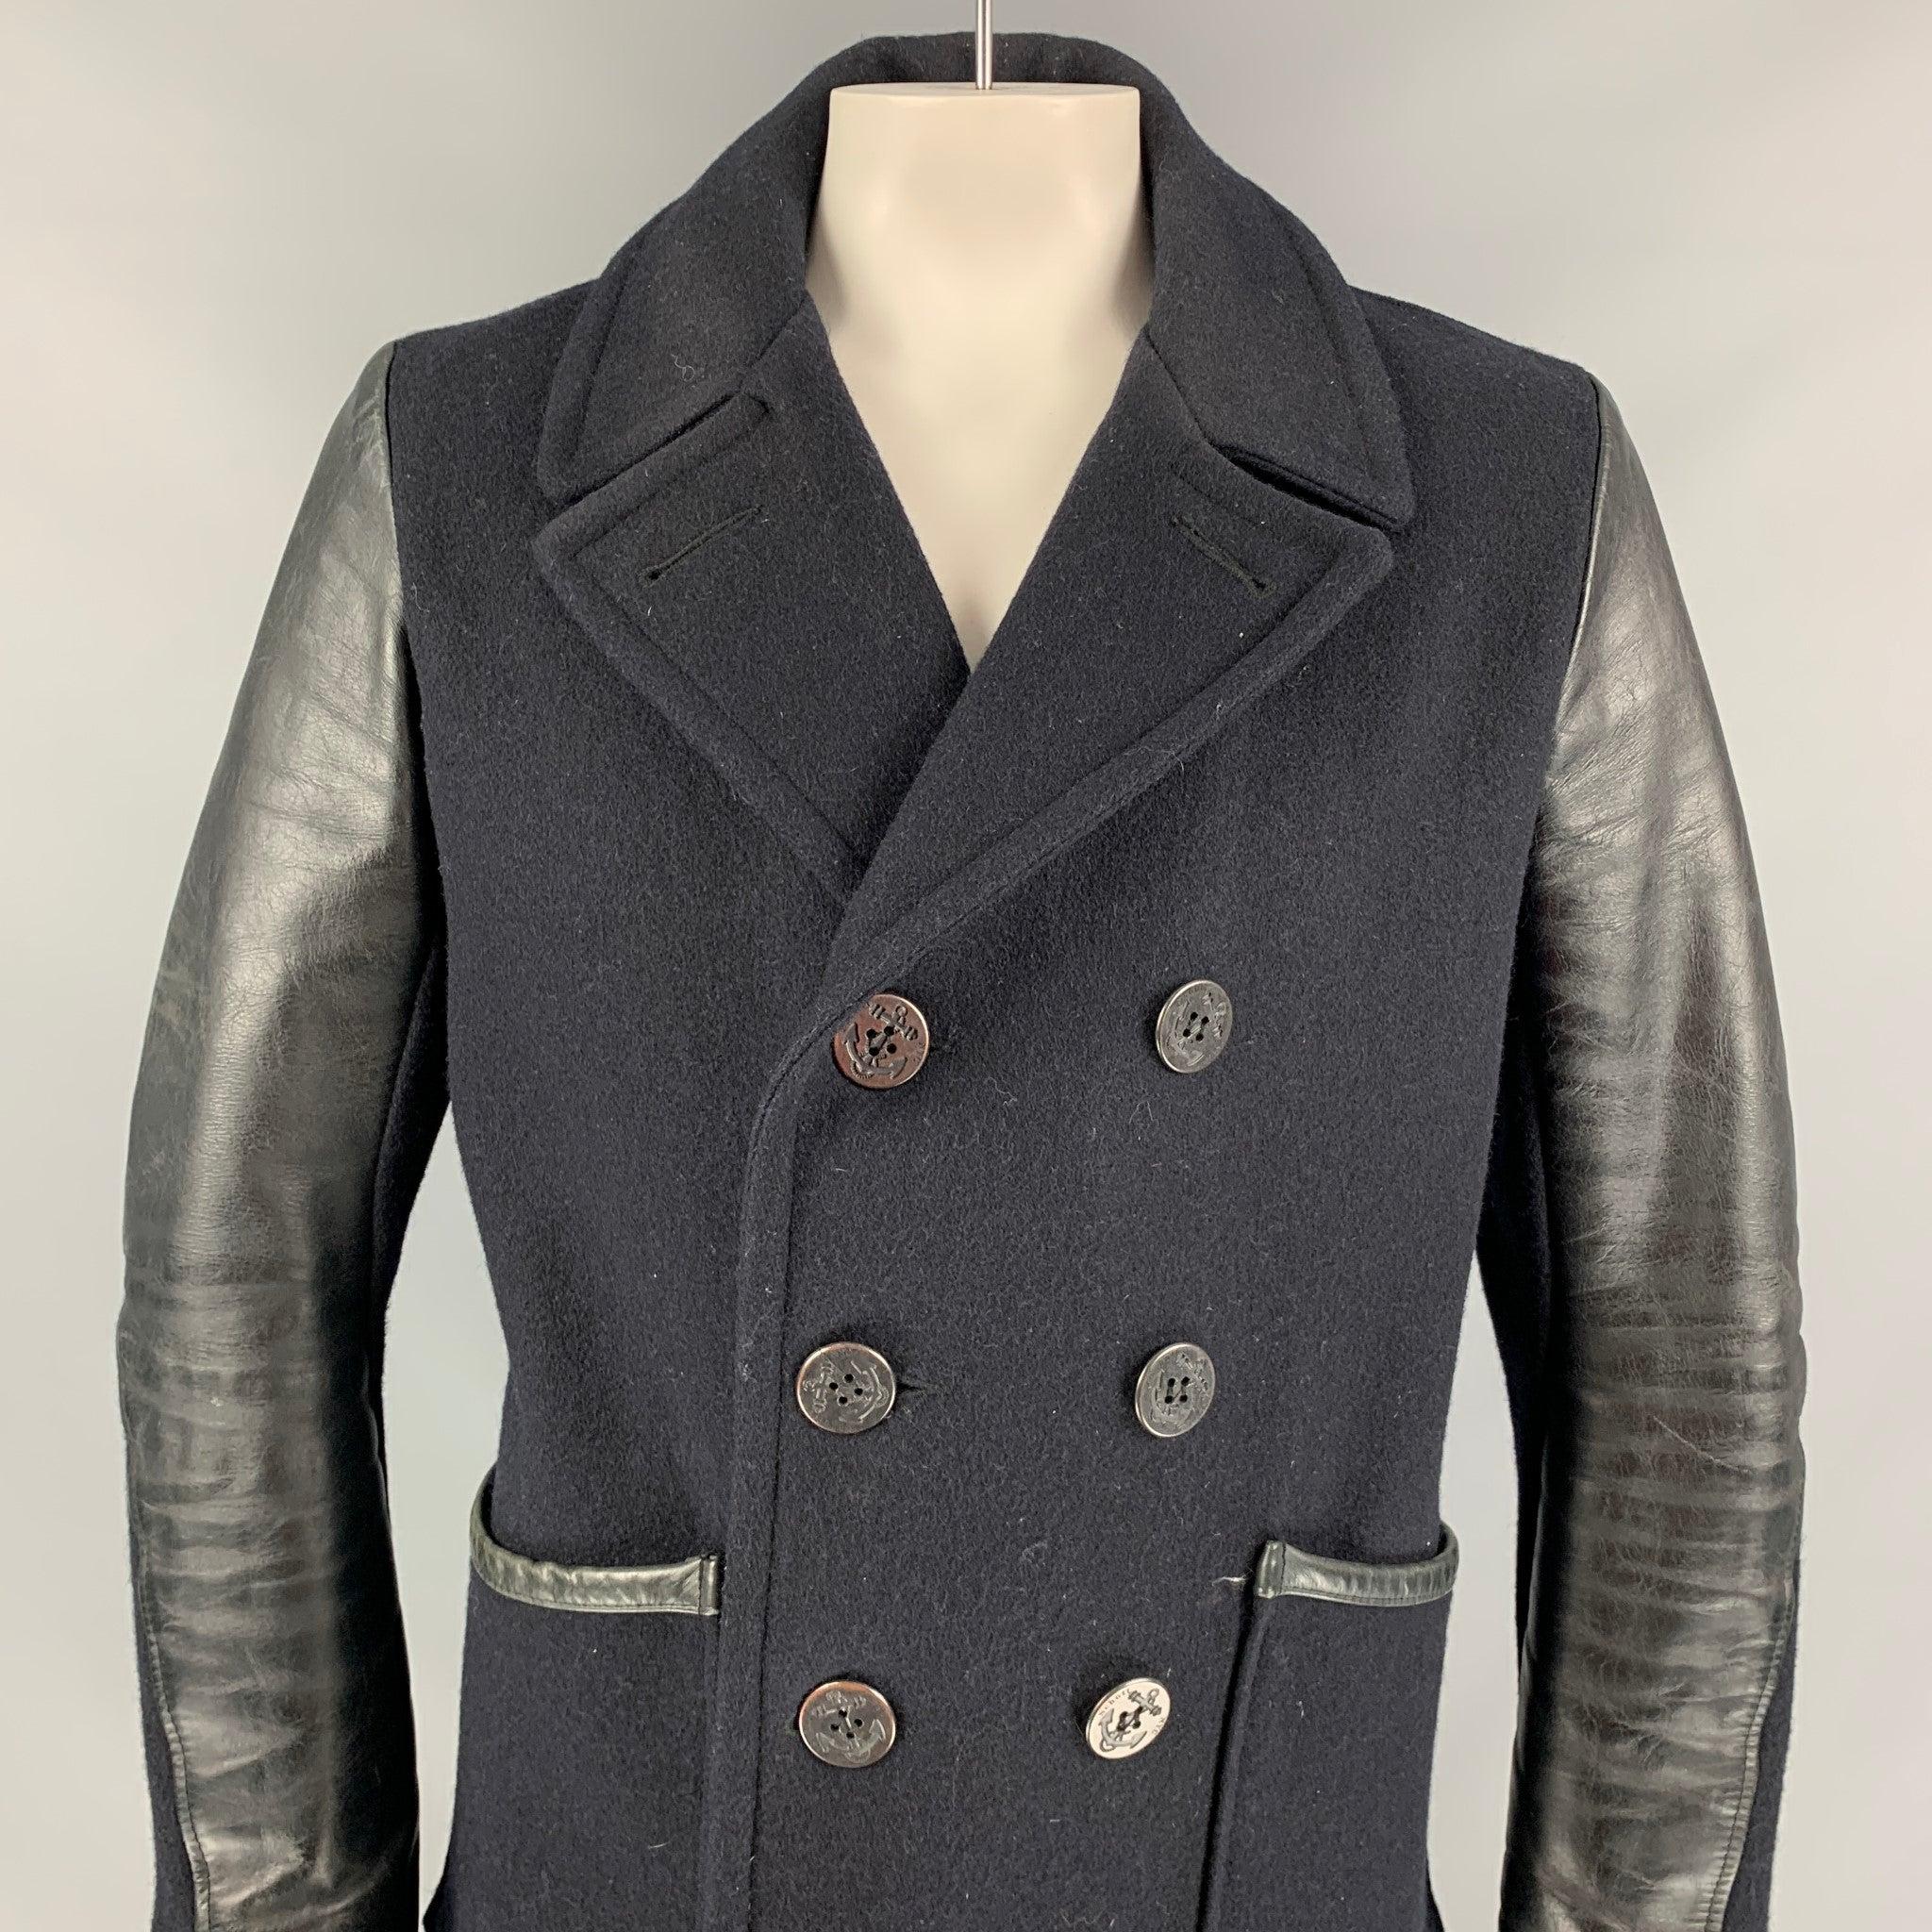 SCHOTT pea coat comes in a black material with a full liner featuring leather sleeves, patch pockets, and a double breasted closure. Made in Canada.
Good
Pre-Owned Condition.  

Marked:   L 

Measurements: 
 
Shoulder: 18.5 inches  Chest: 44 inches 